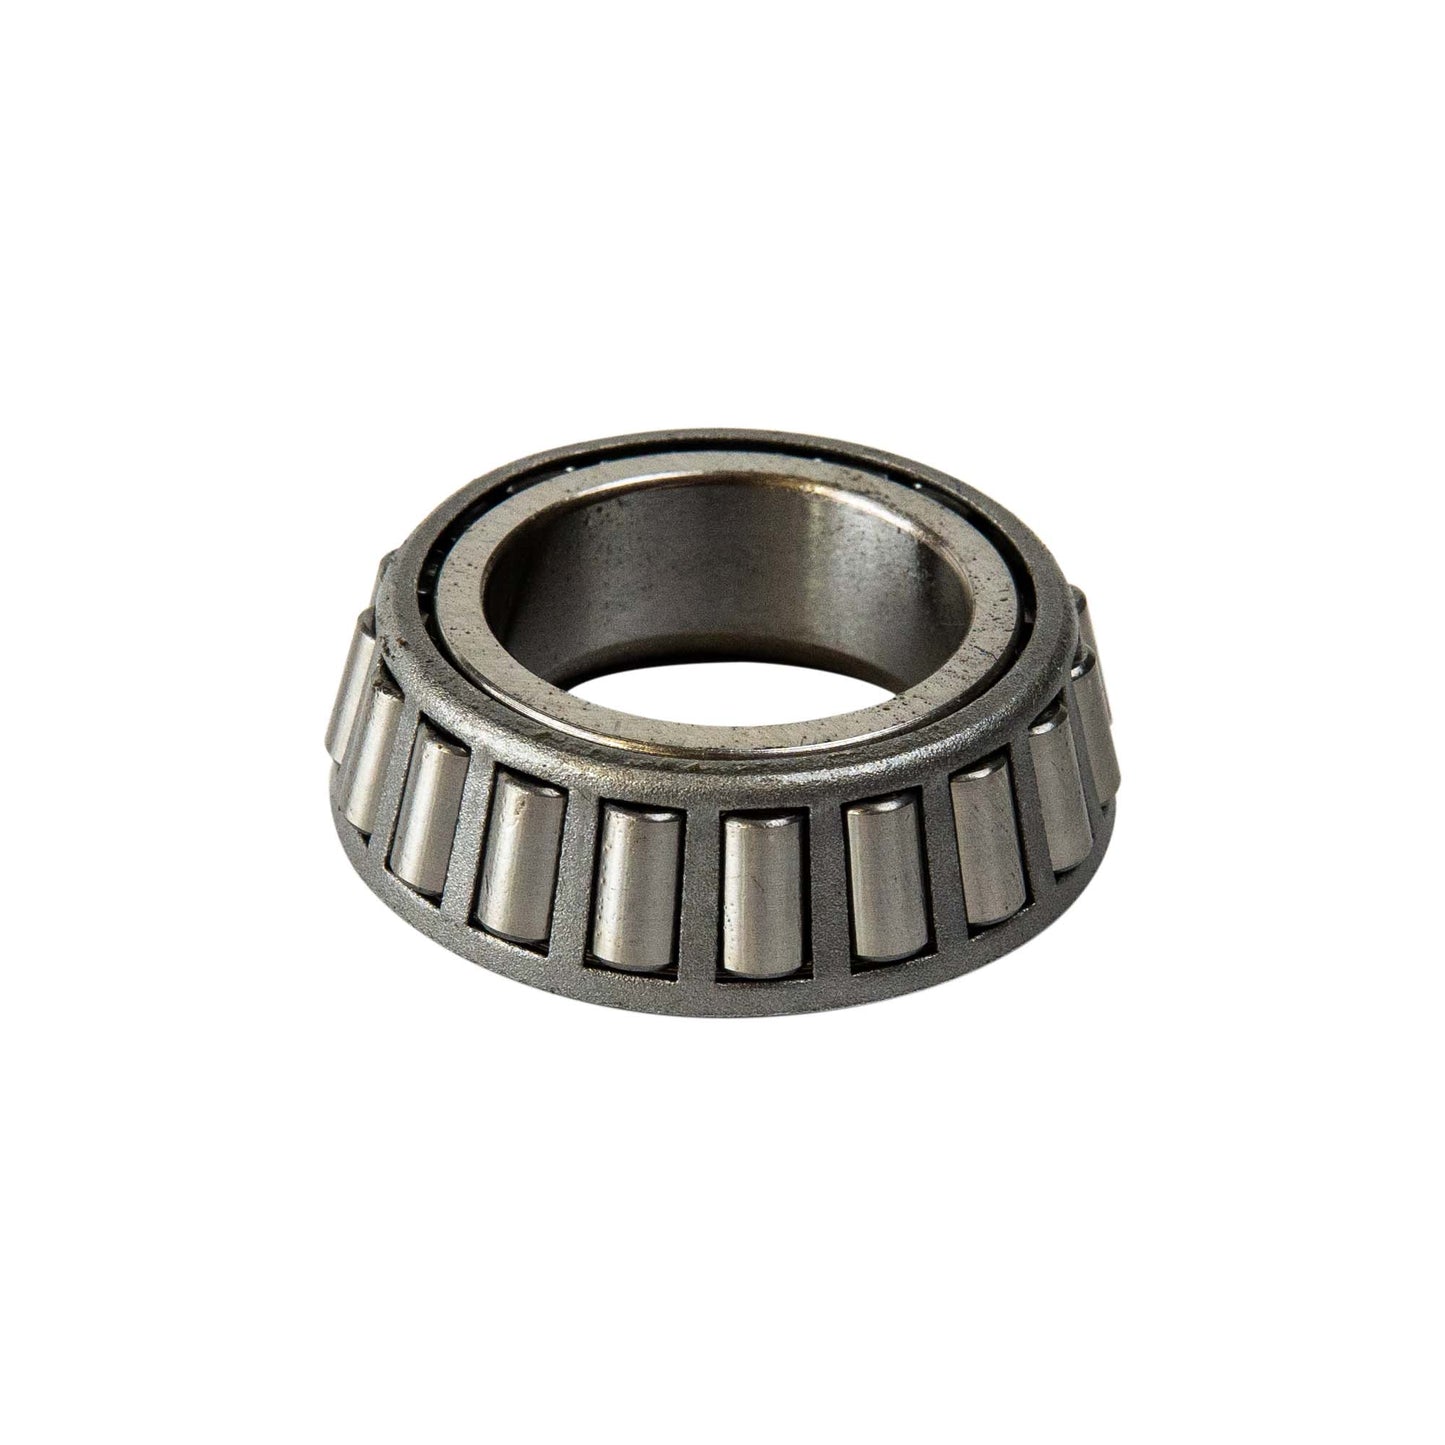 2k Trailer Axle Inner/Outer Bearing - L44649 - Dexter Compatible